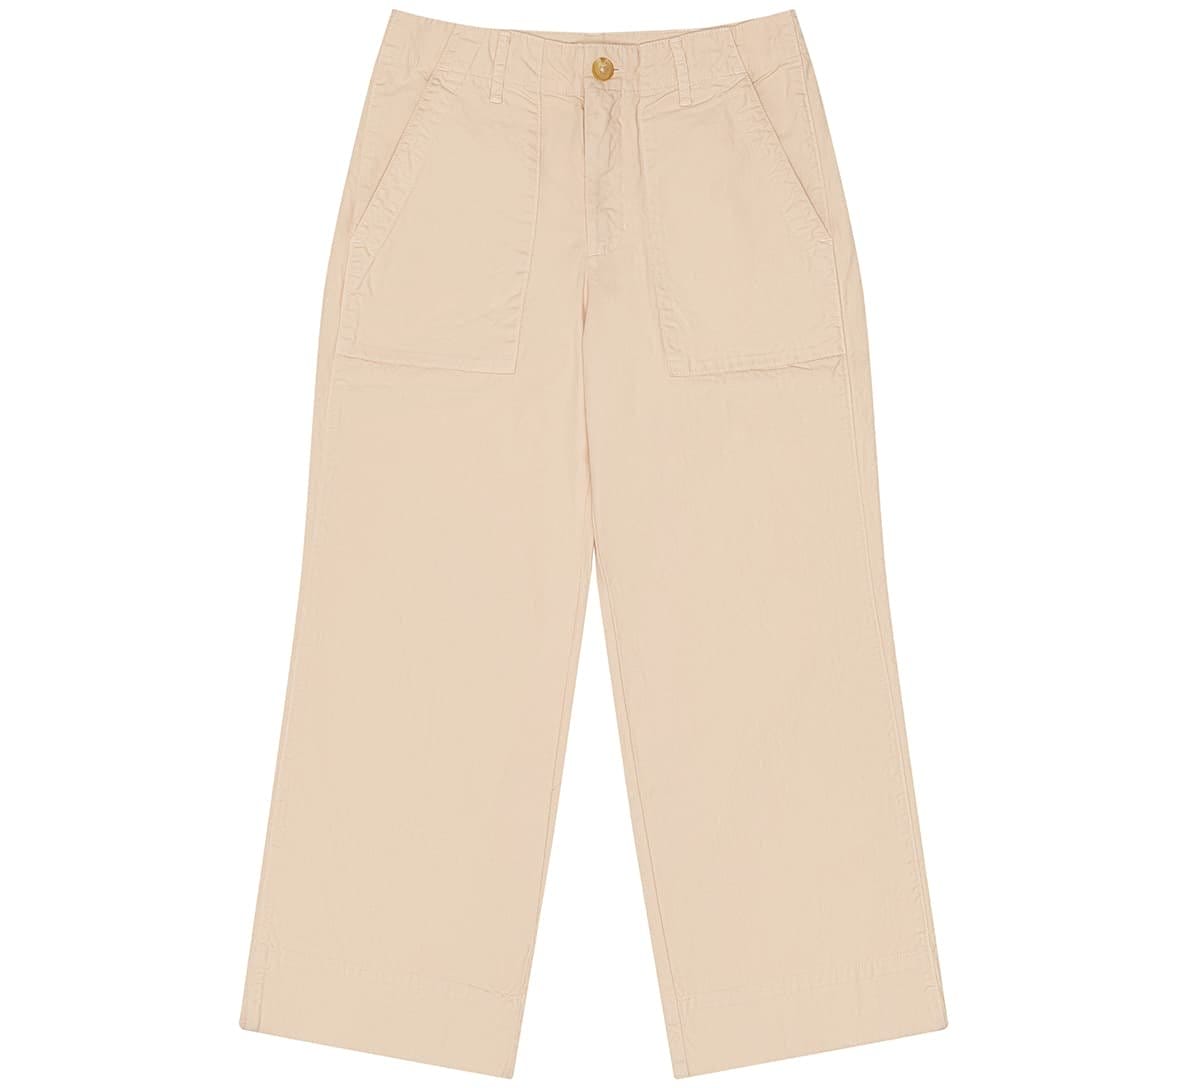 Featuring the Mya Cotton Canvas Pant